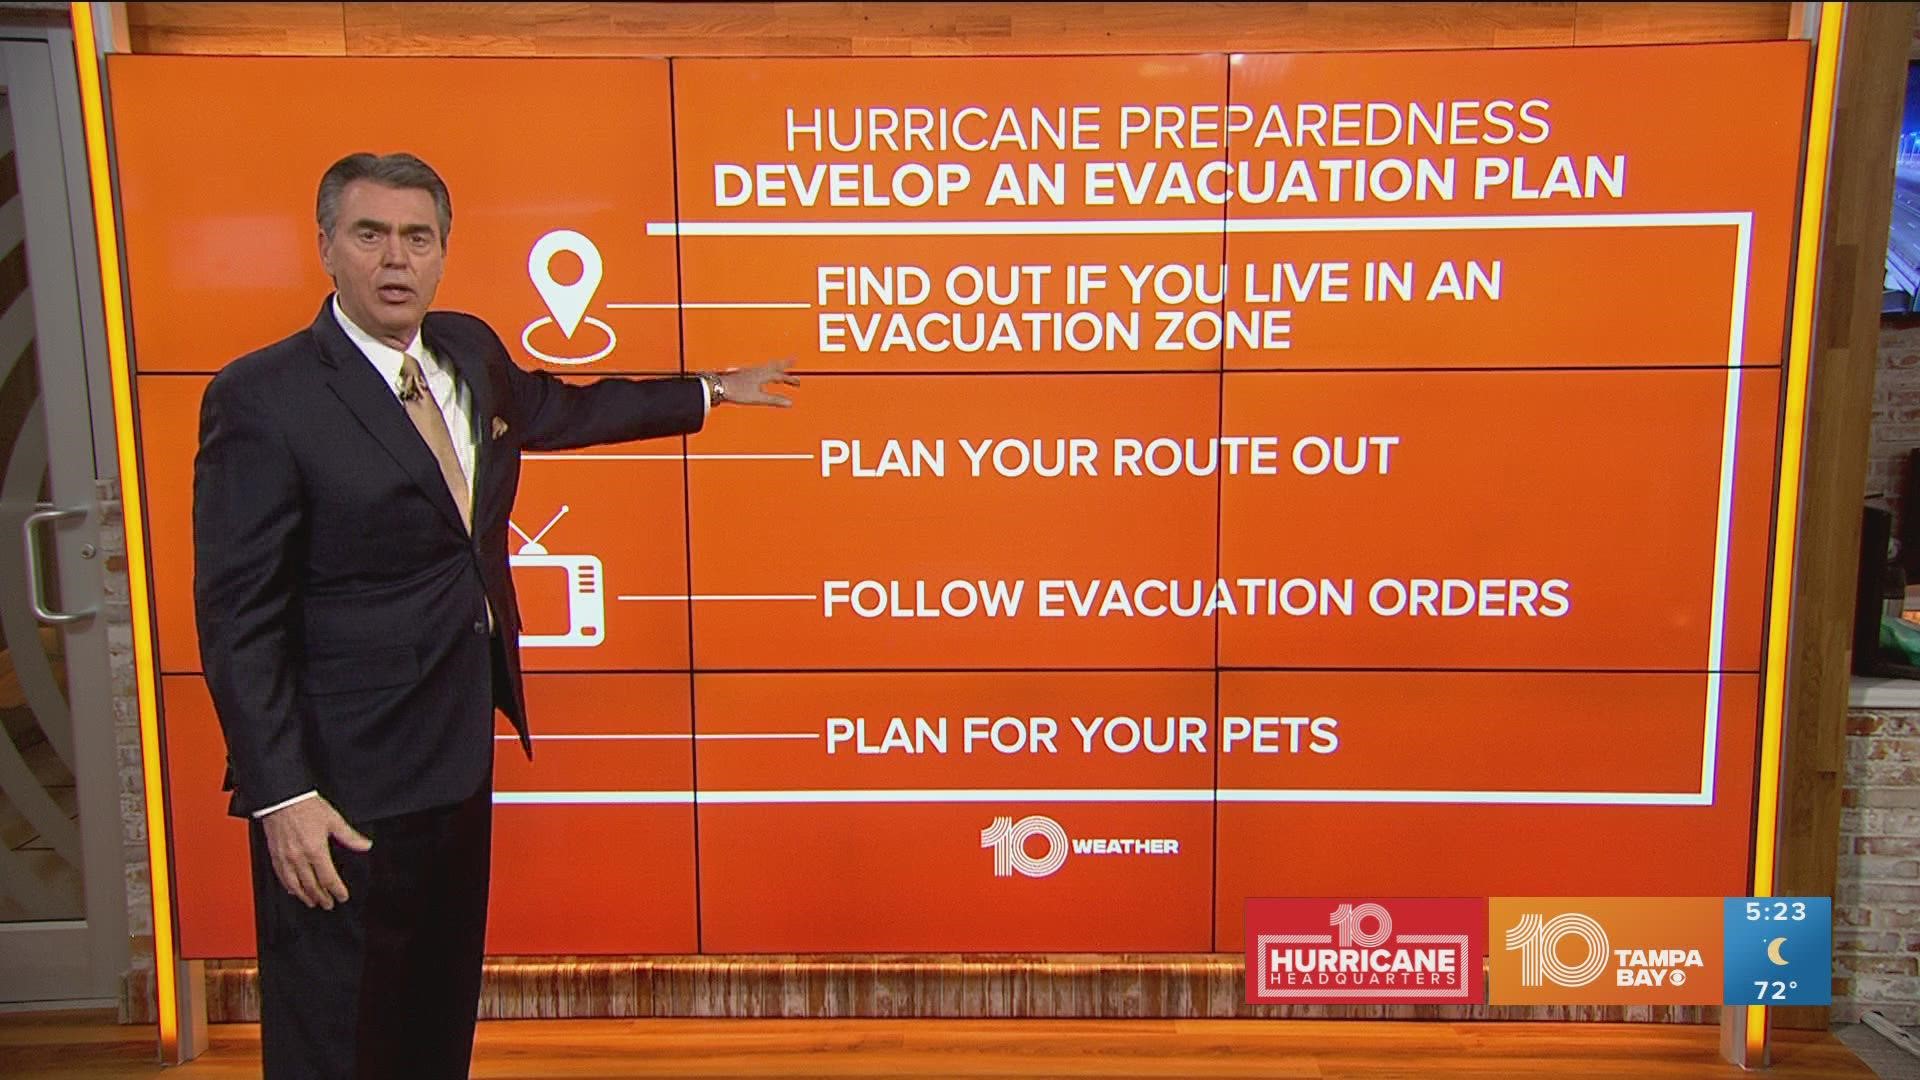 Whether it's your first hurricane season or you're a seasoned veteran, it's always a good idea to make sure your plan is up to date.